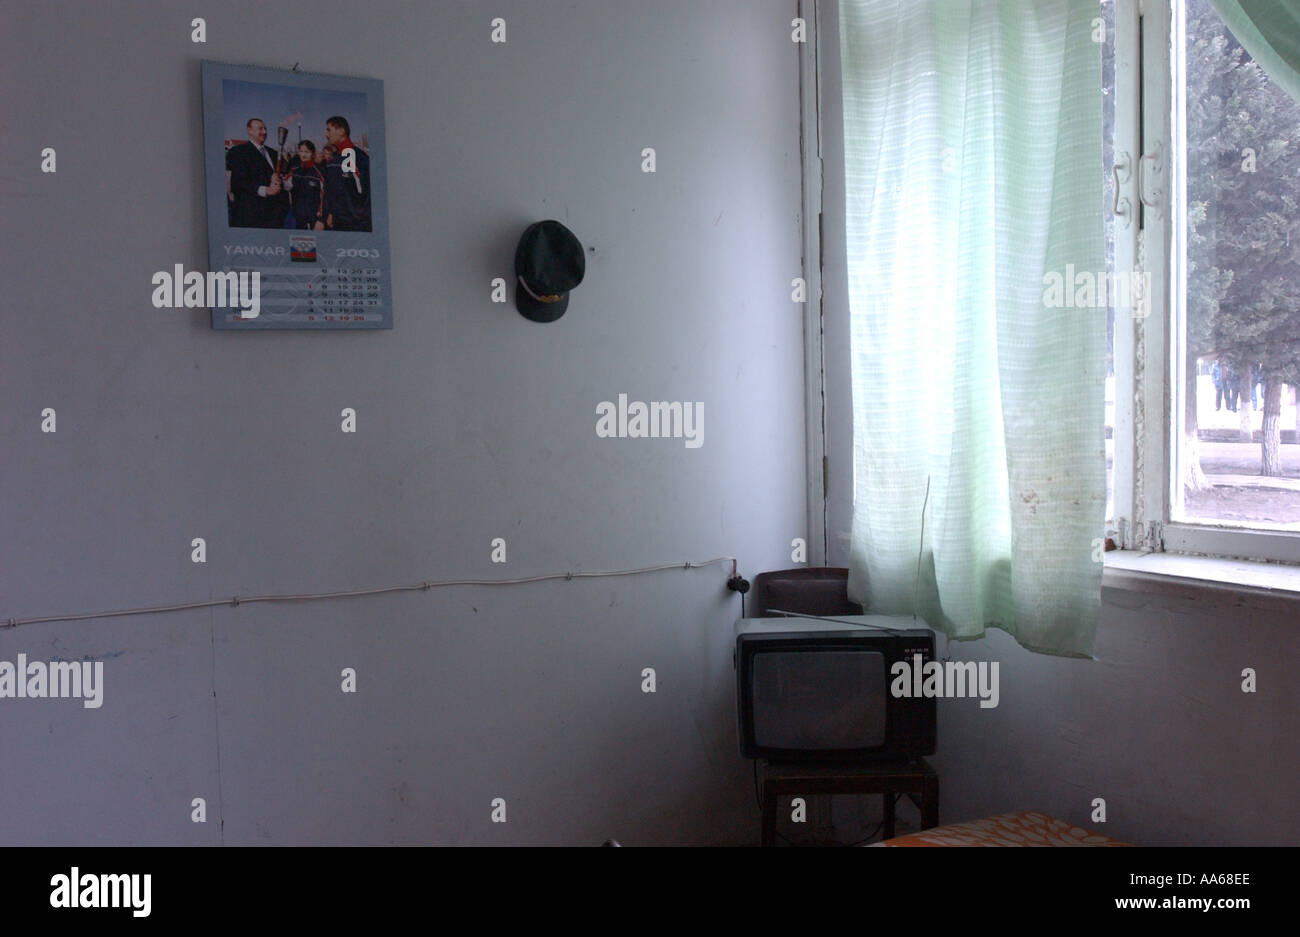 Imishli Distric Azerbaijan January 12 2003 An office stands empty except for a calender television and hat for a government Stock Photo